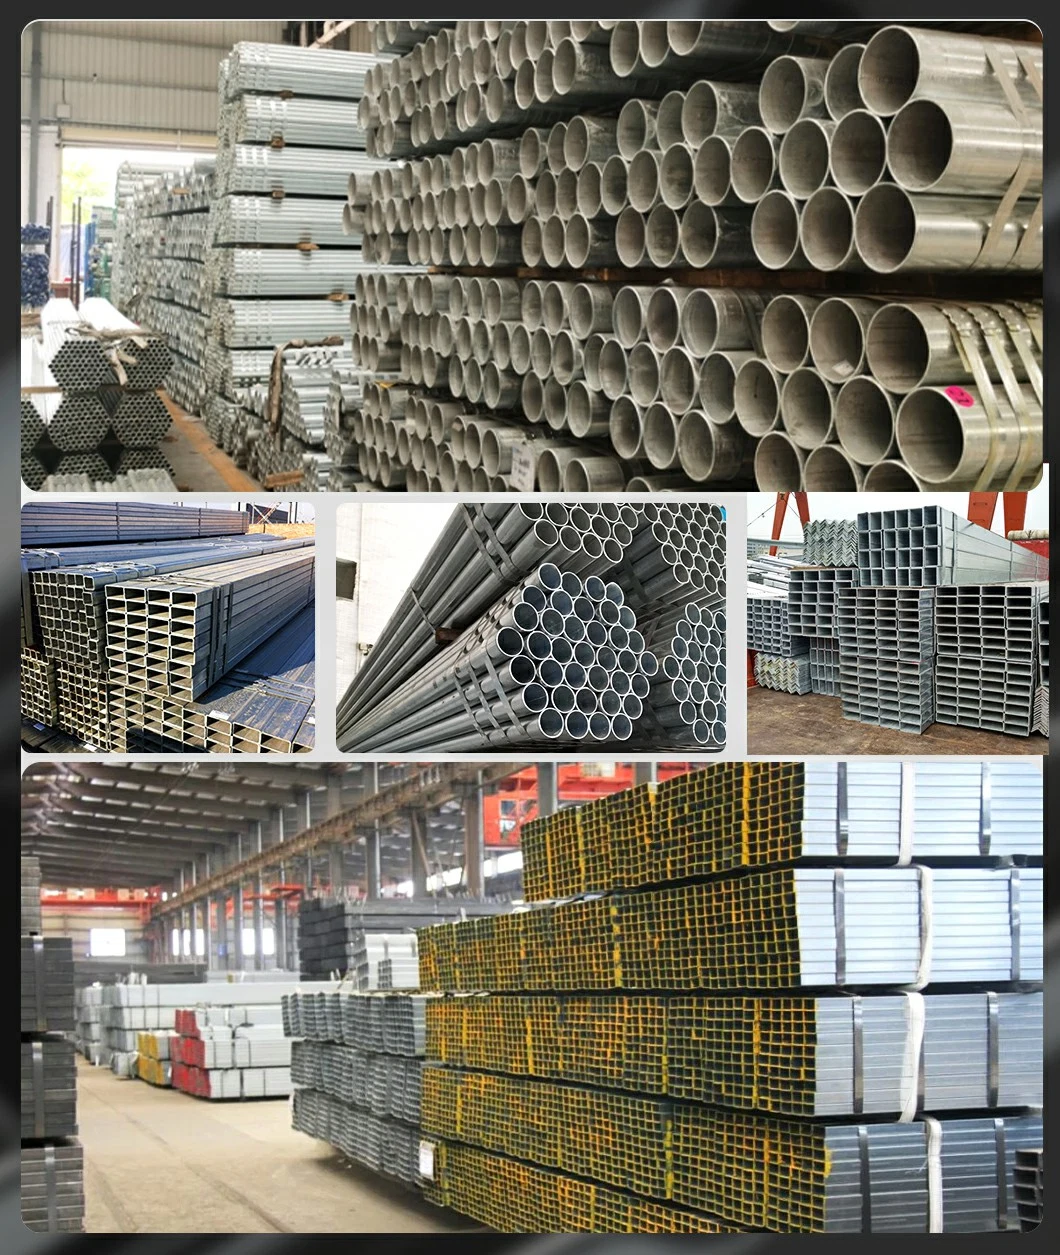 10 Inch Hot Dipped Galvanized Pipe 32mm SA106 Grade B Seamless Pipe Various Styles Competitive Price Galvanized Steel Tube Made in China